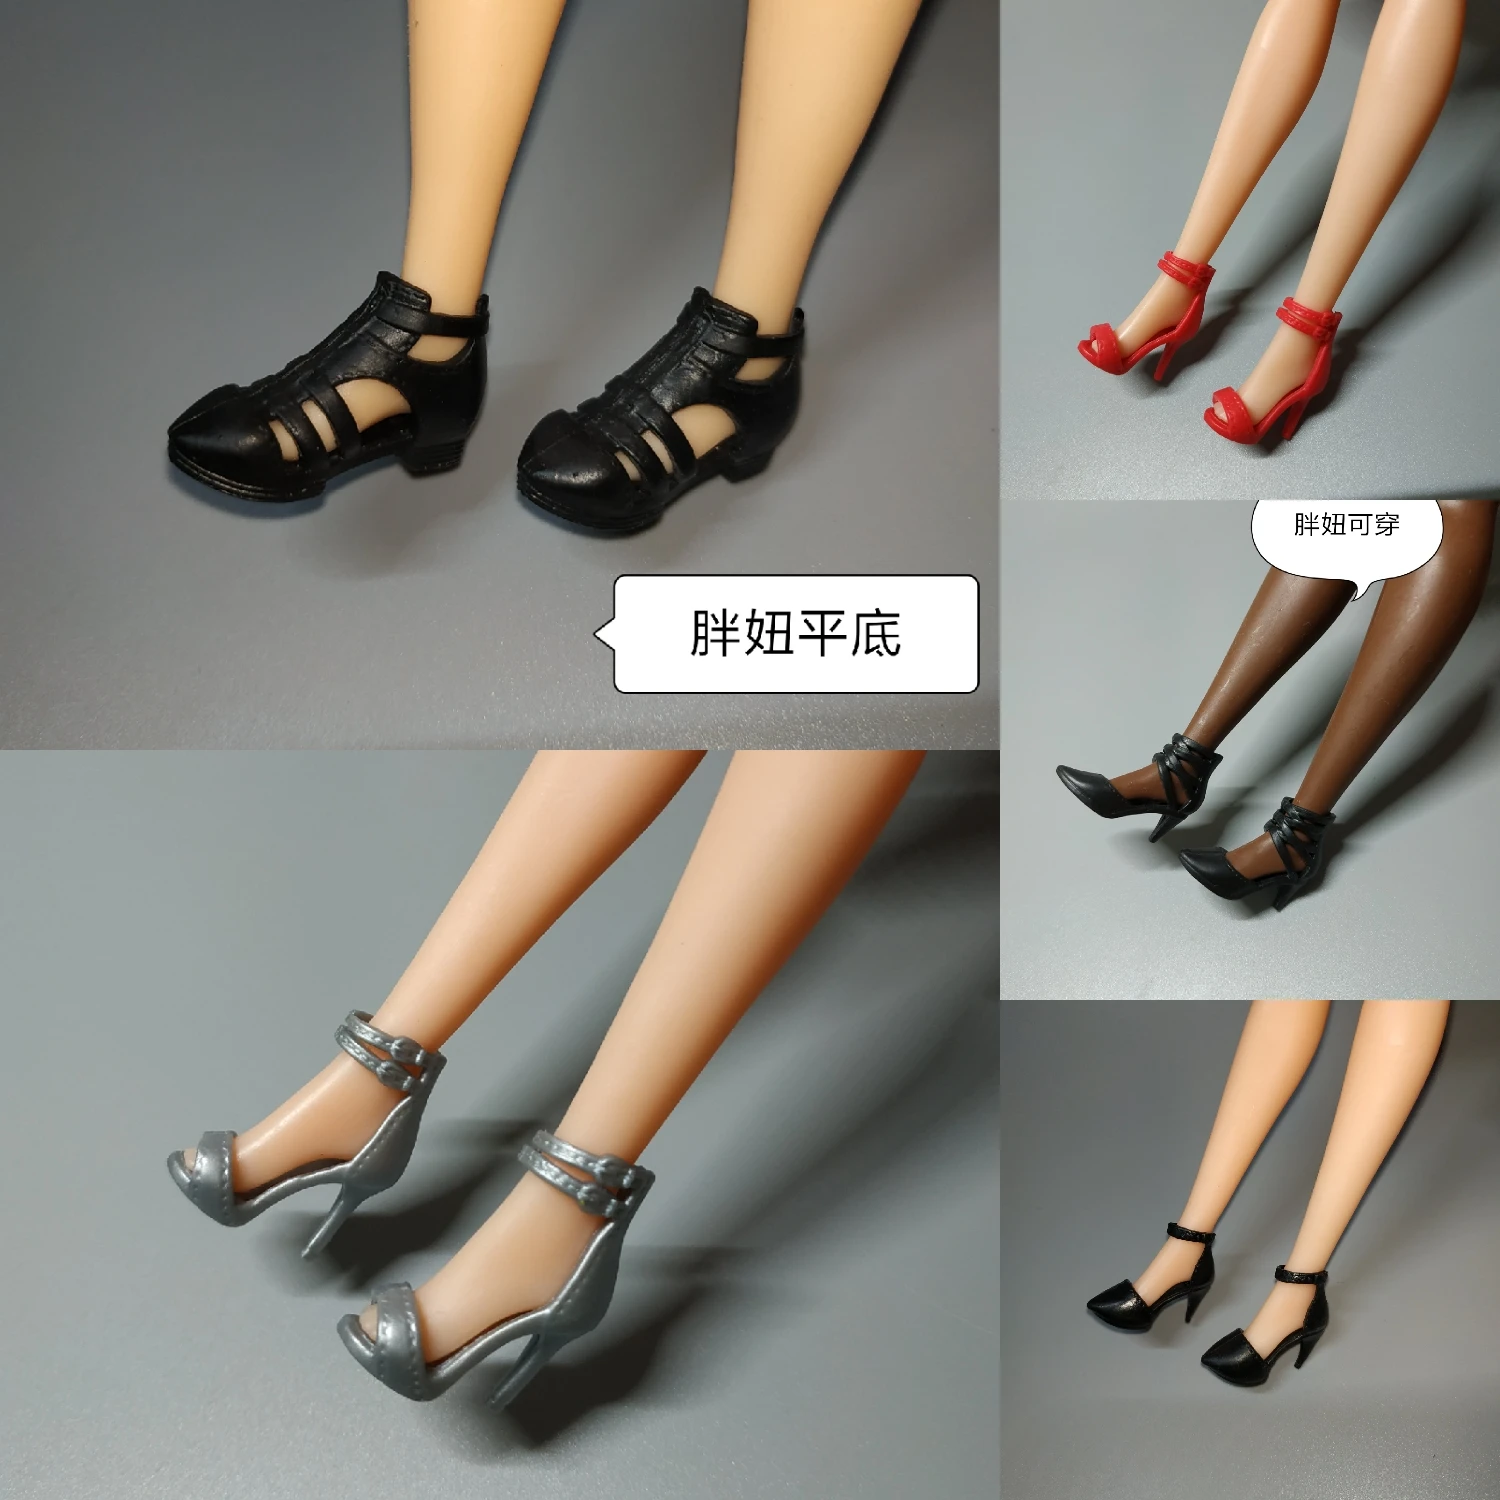 

1/6 Doll Accessories Fashion Sneaker Flat Shoes Genuine Sandals Shoeshigh-heeled shoes for 30cm Doll Shoes